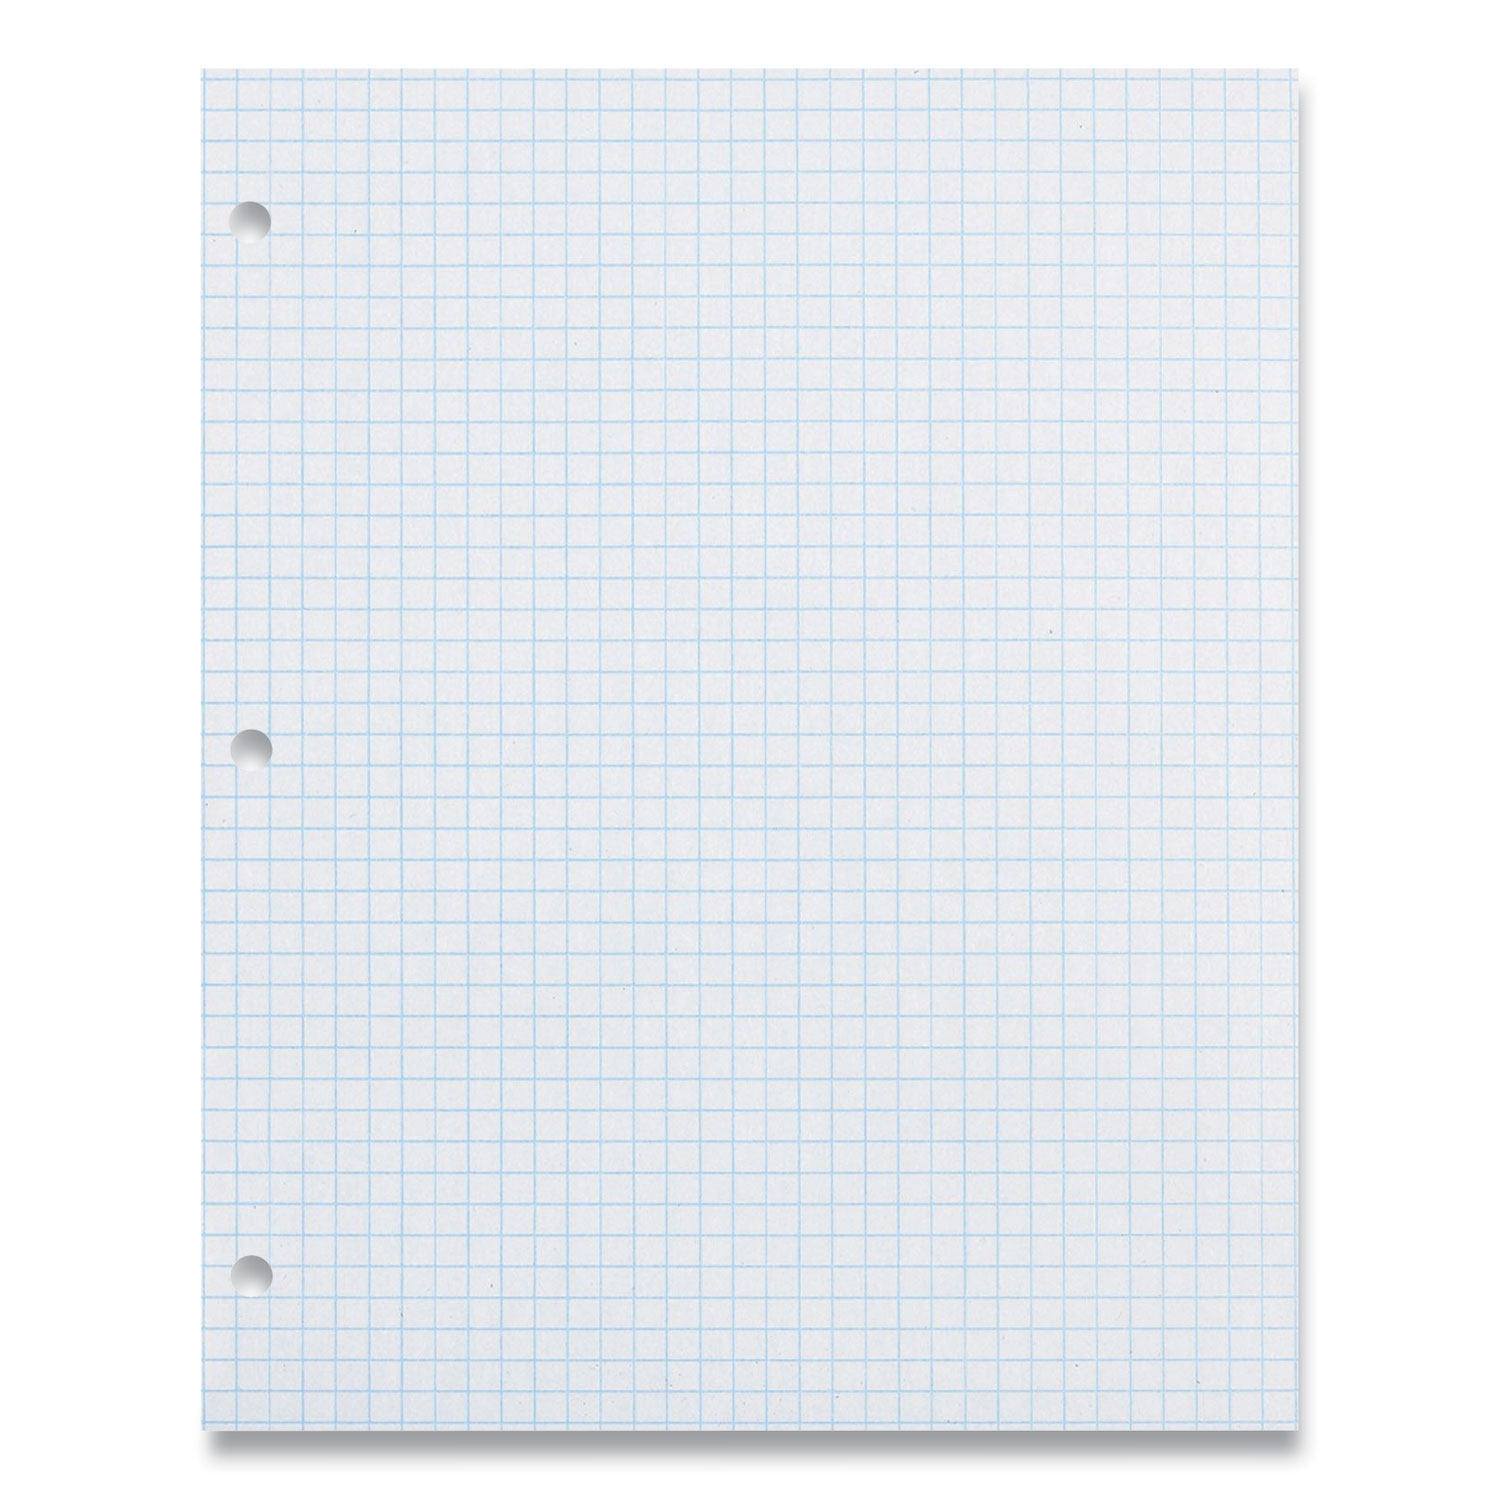  Pacon 2414 Composition Paper, 3-Hole, 8.5 x 11, 1/4, Quadrille: 4 sq/in, 500/Pack (PAC376104) 